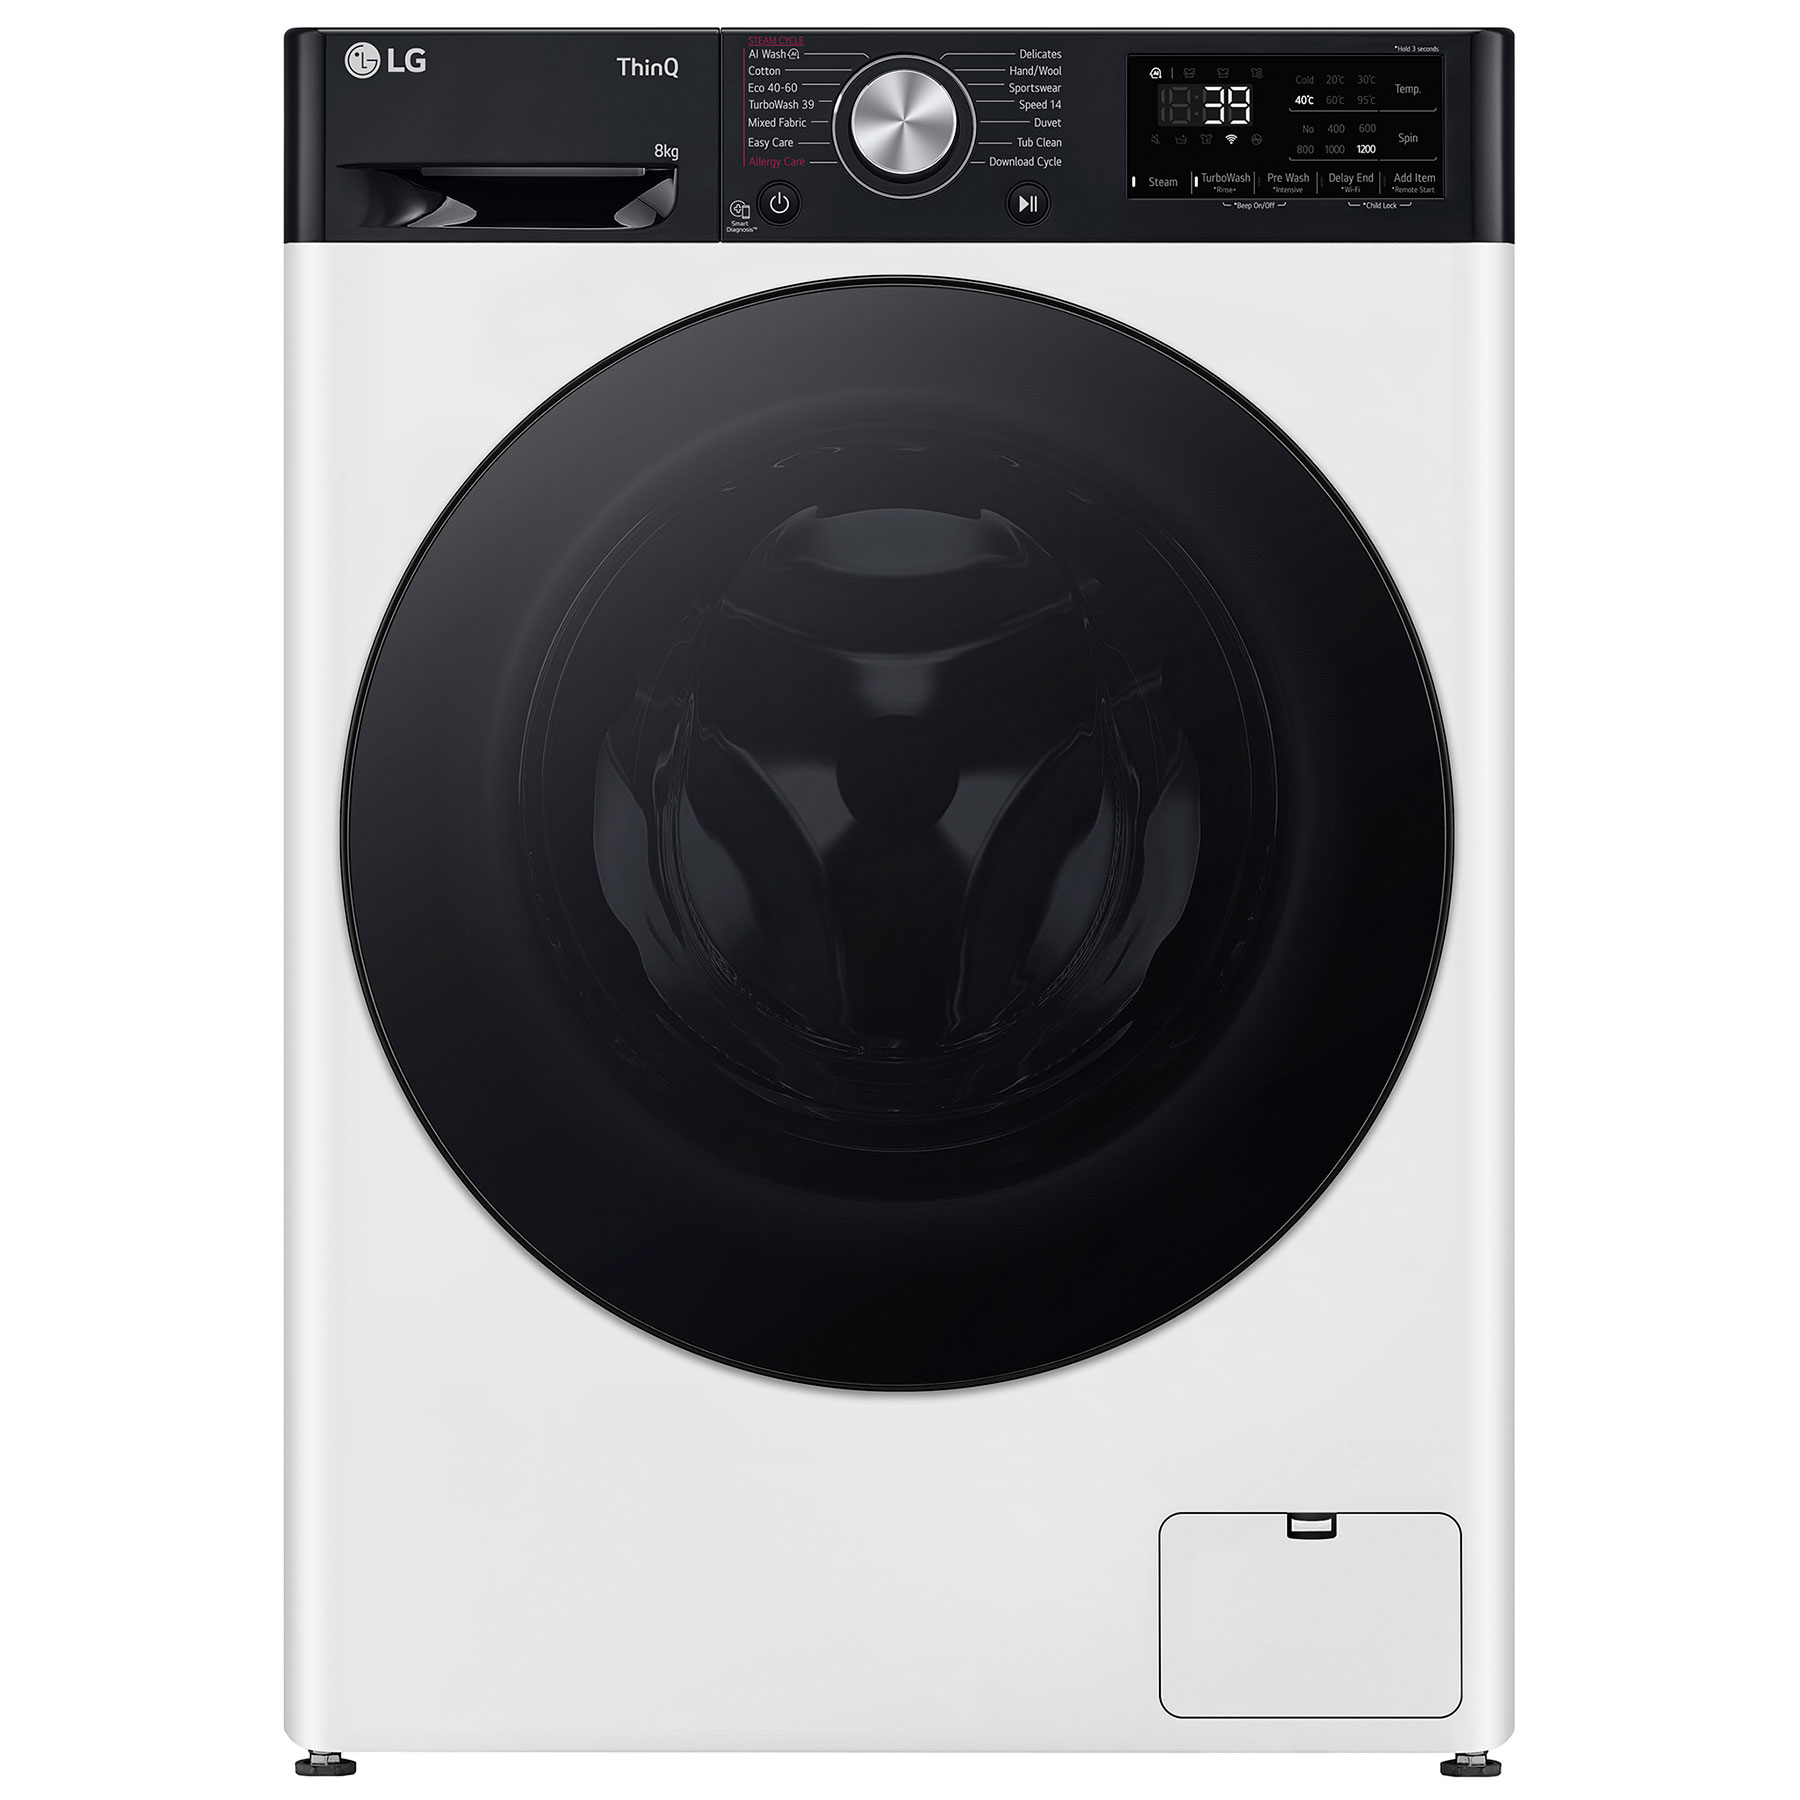 Image of LG F2Y708WBTN1 Washing Machine in White 1200rpm 8kg A Rated Wi Fi